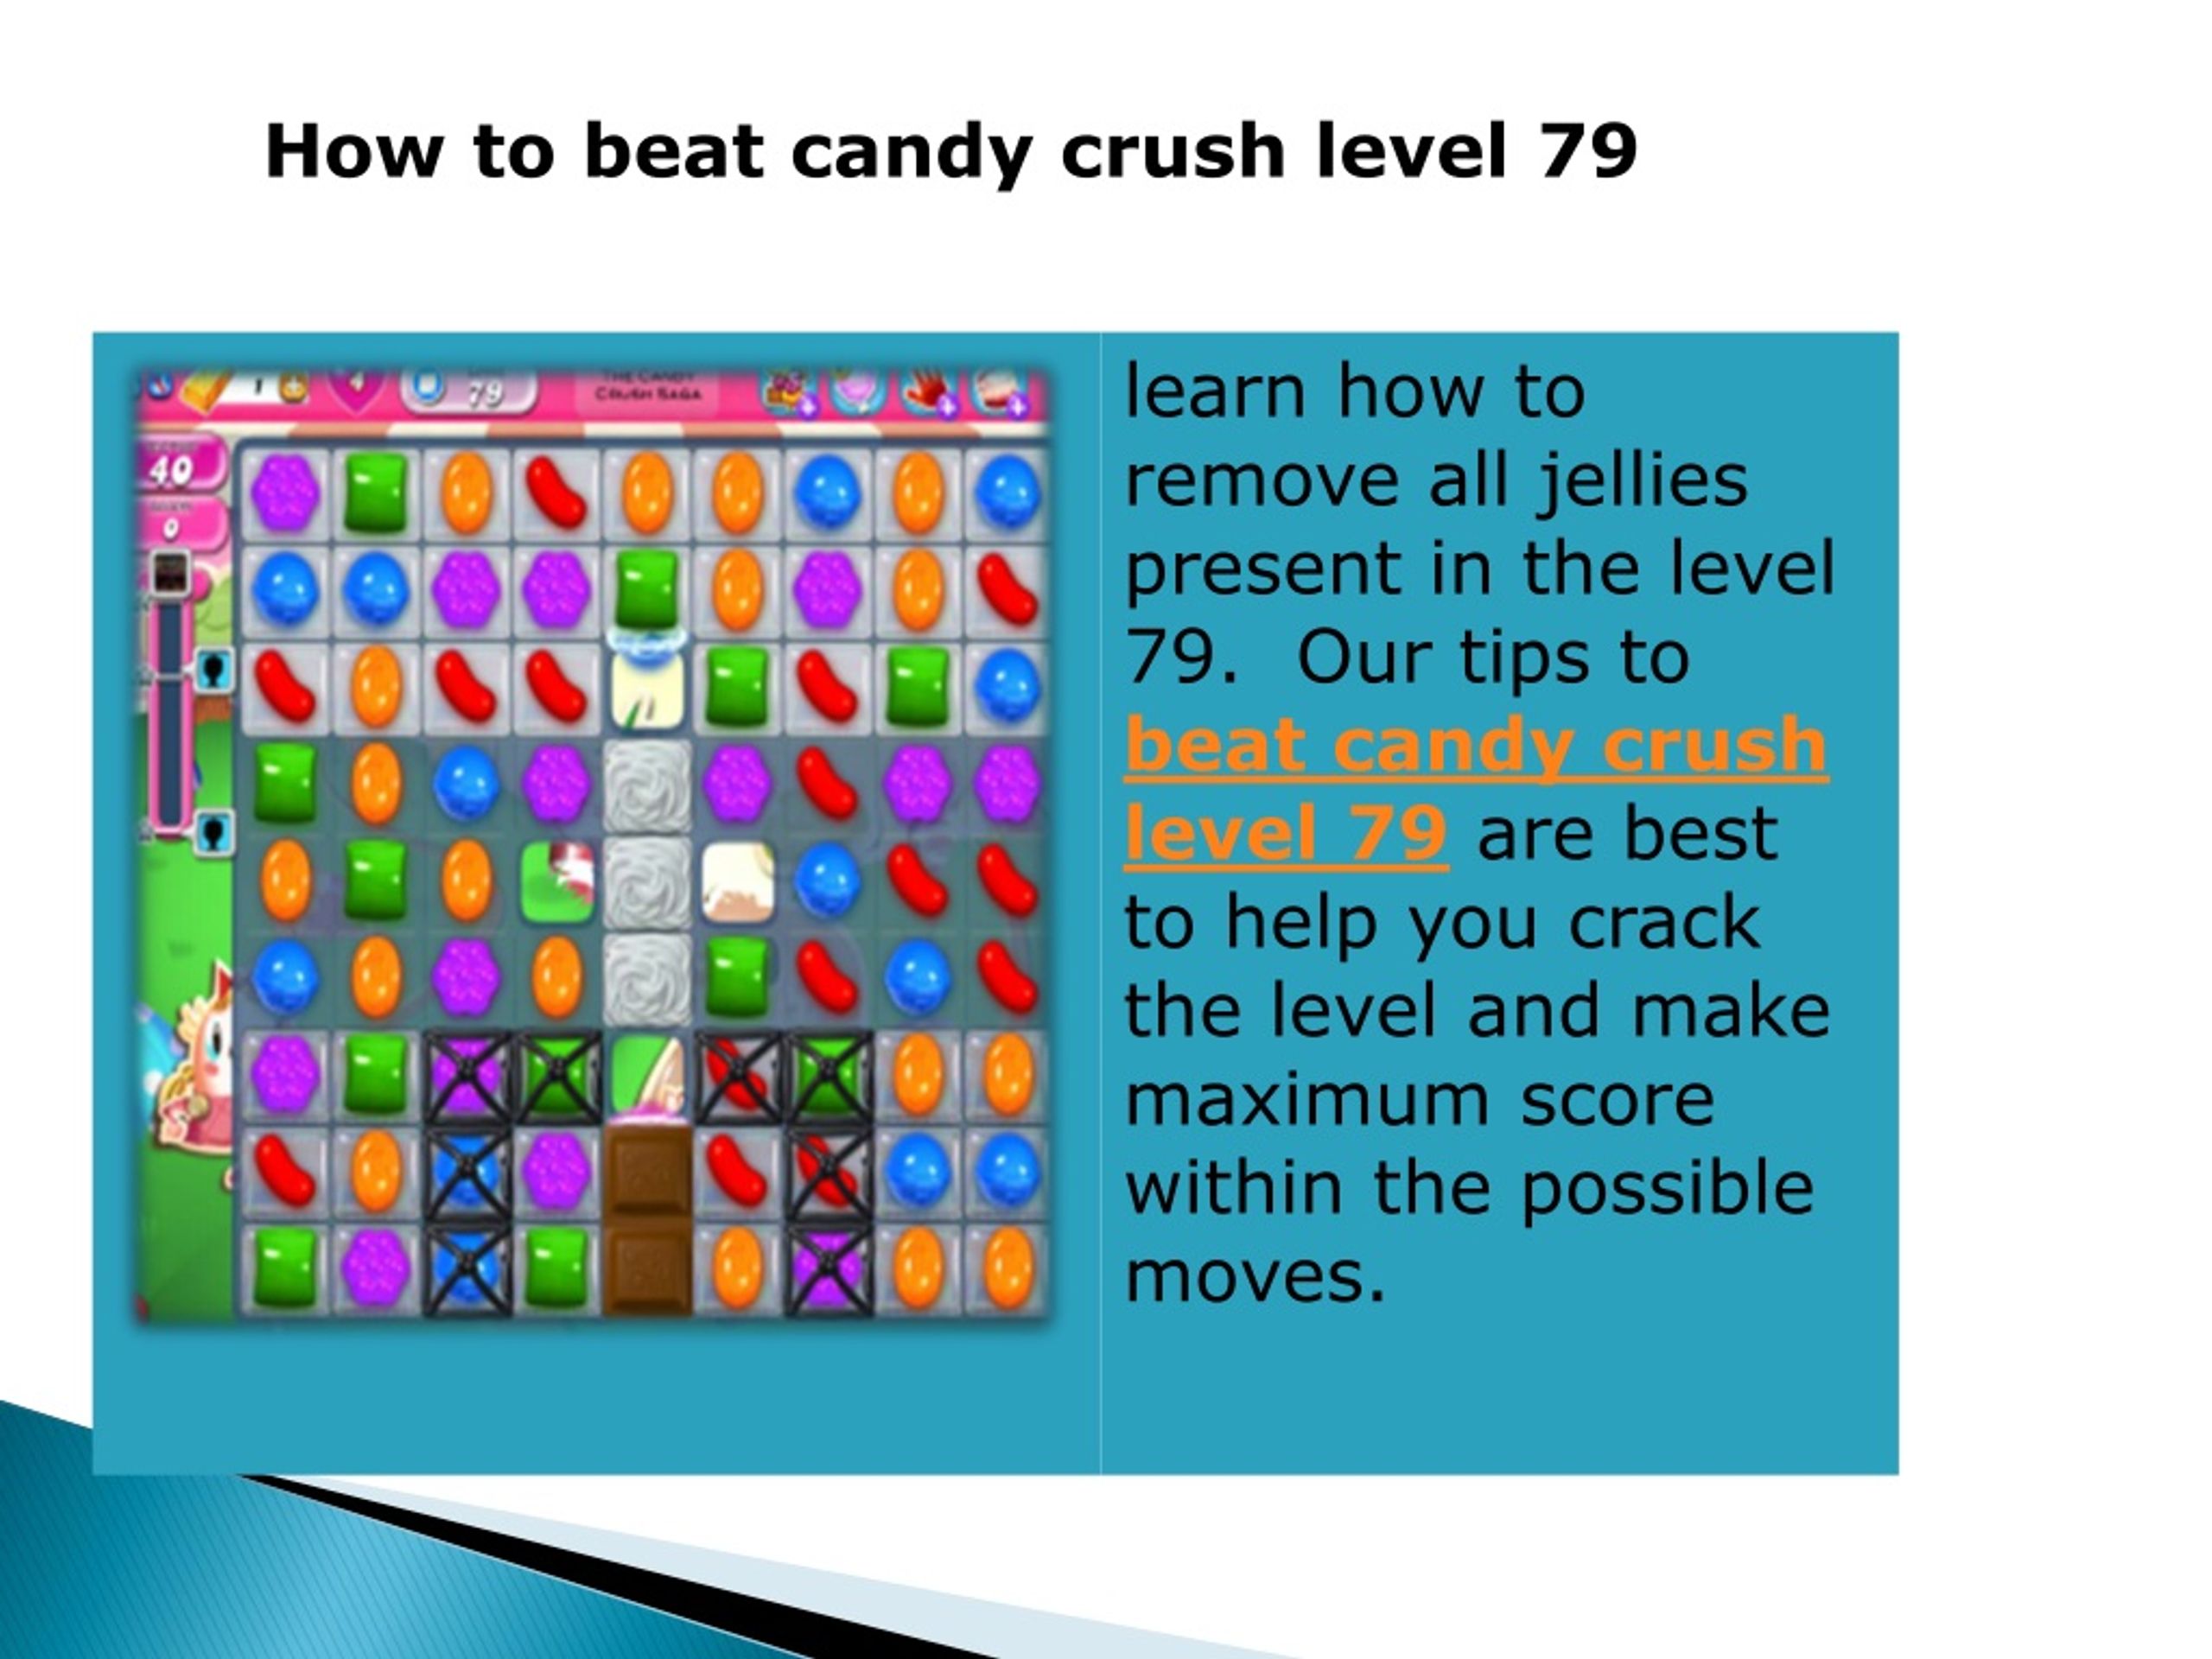 Candy Crush Saga - Tips and Tricks to Clear the Board and Beat Levels